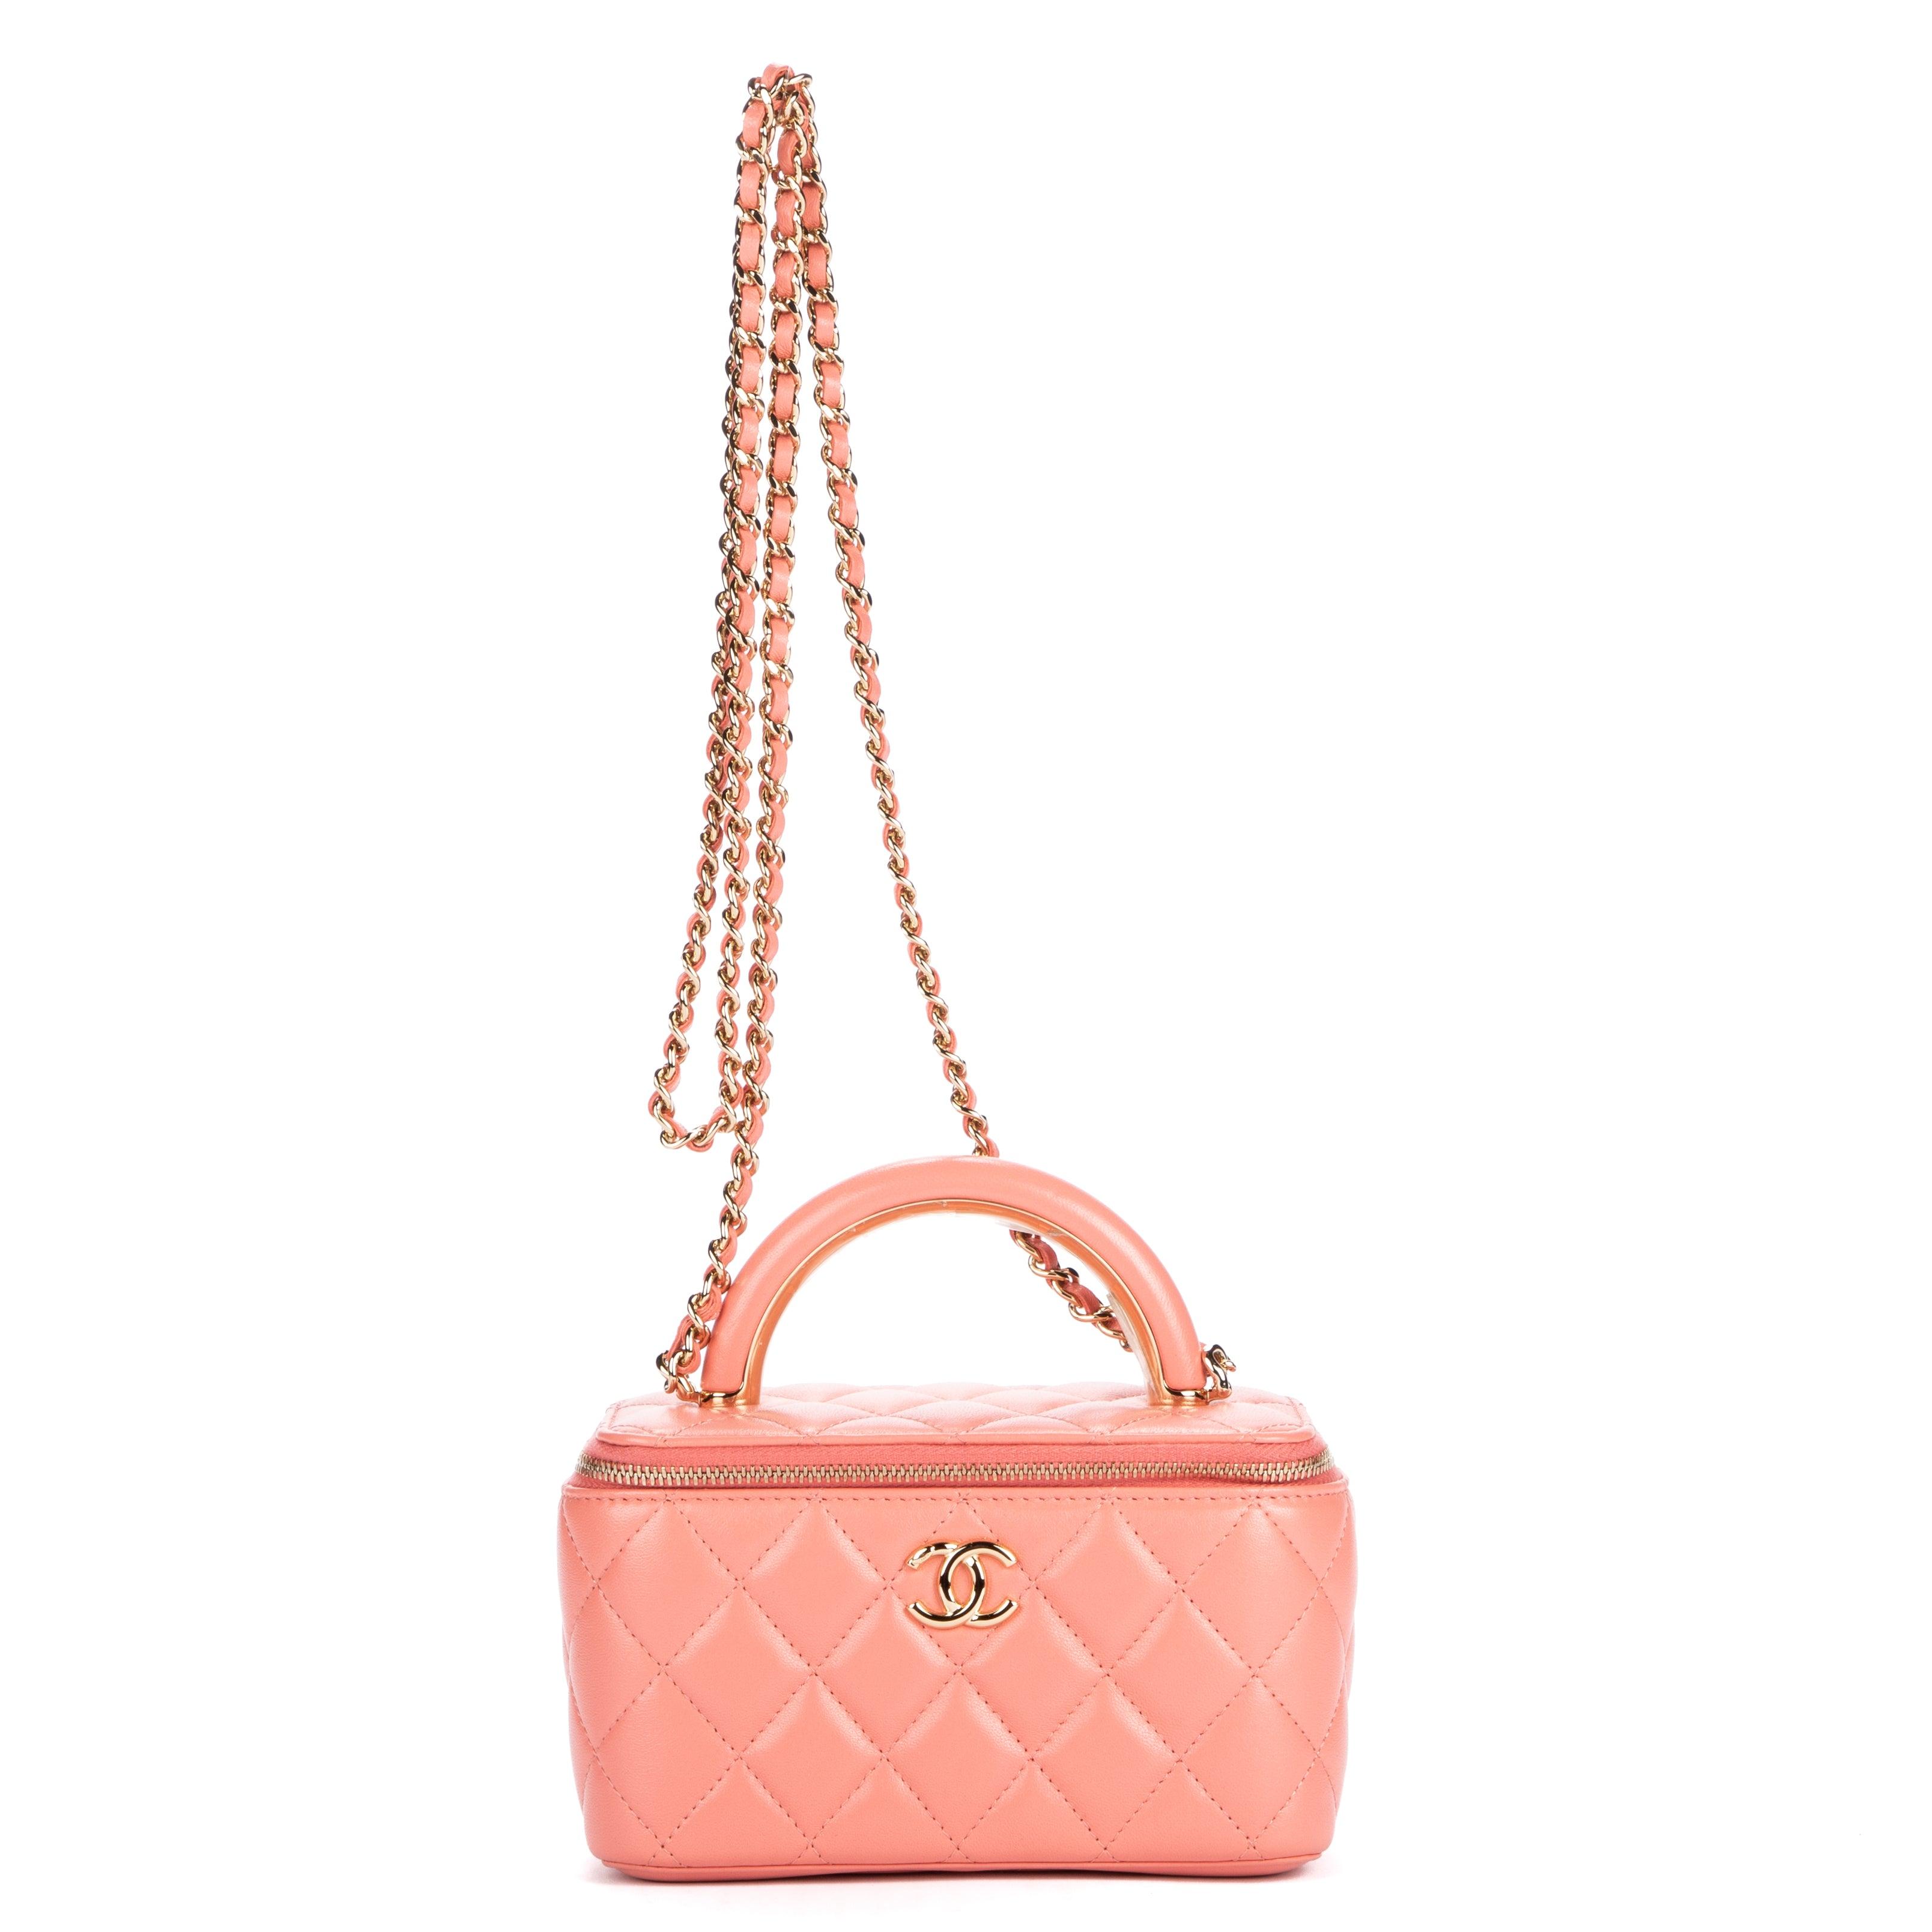 Chanel Pink Leather Small Chain Vanity Case Shoulder Bag Chanel